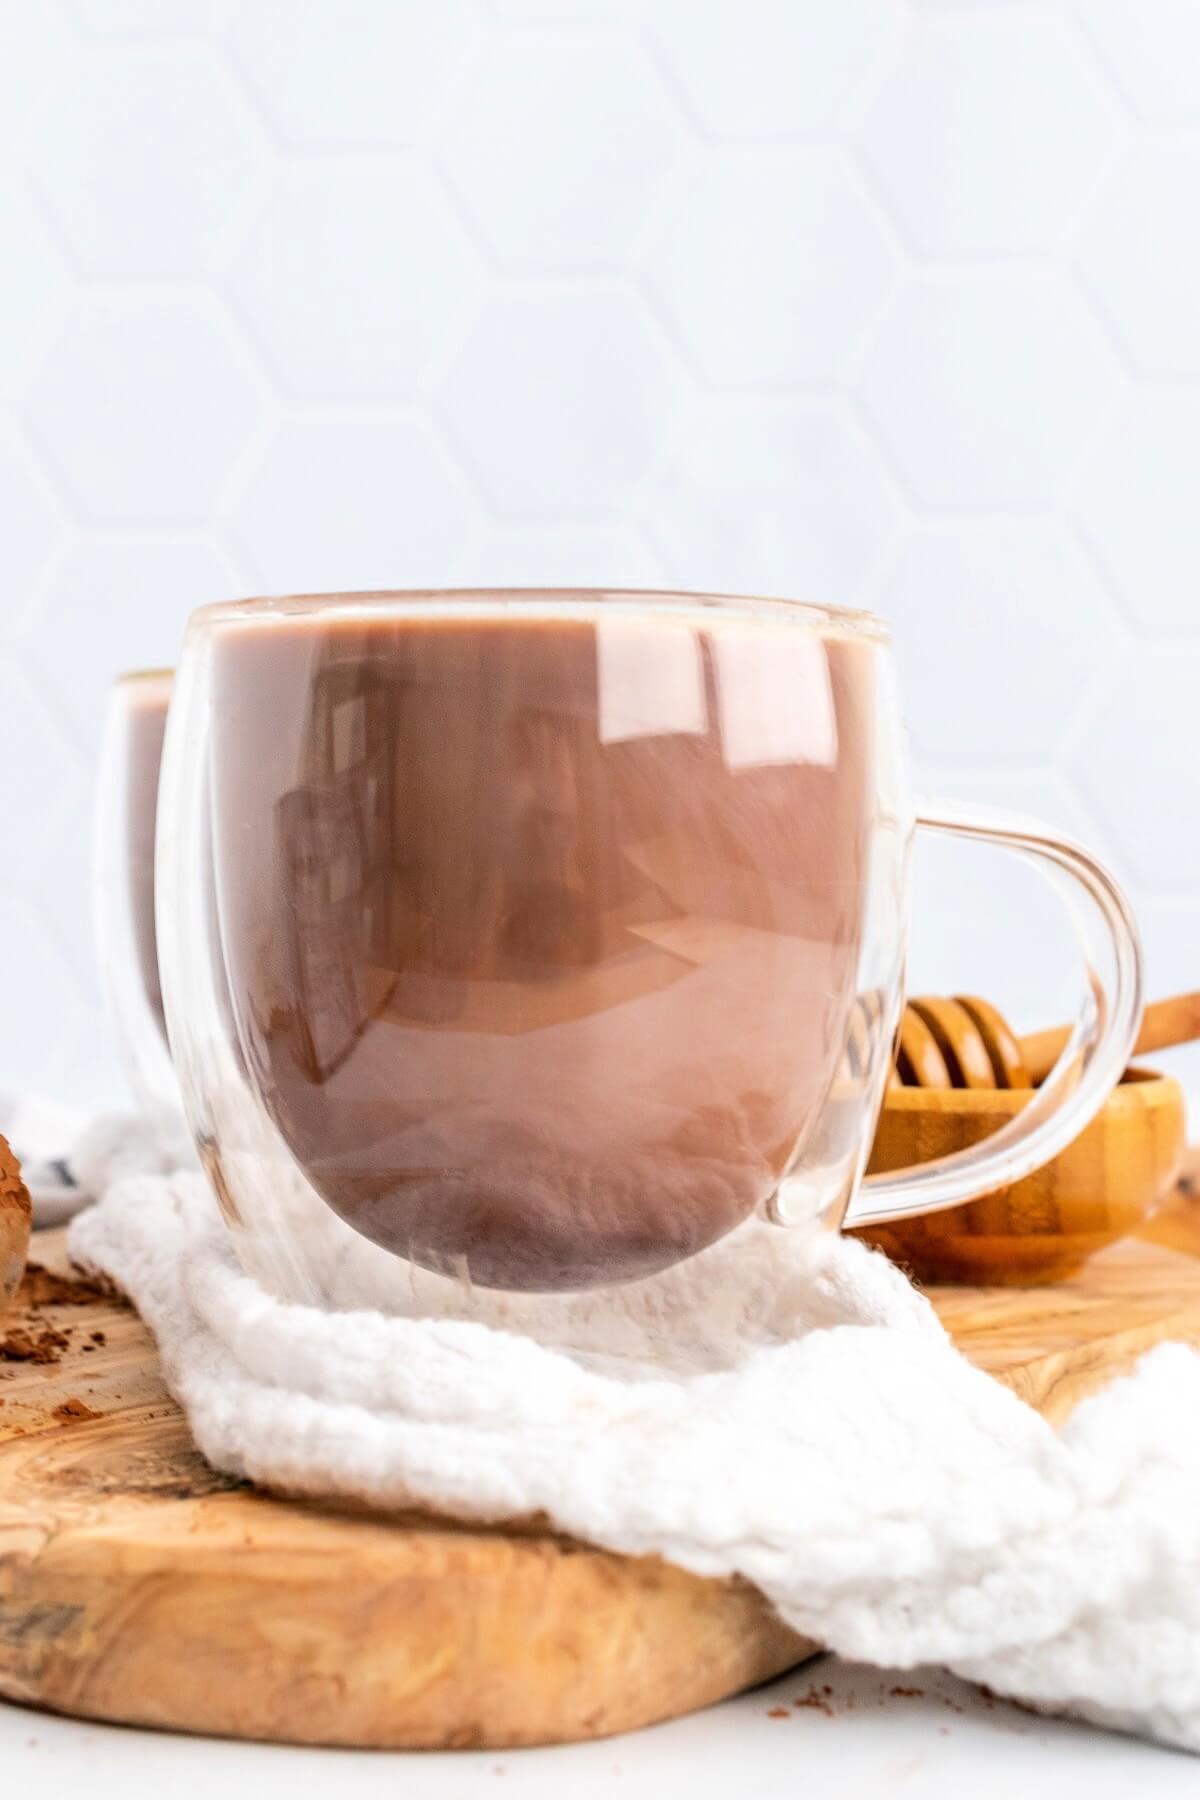 Glass mug filled with hot chocolate sitting on a wooden cutting board and a cloth kitchen towel with a honey dipper sitting behind it.